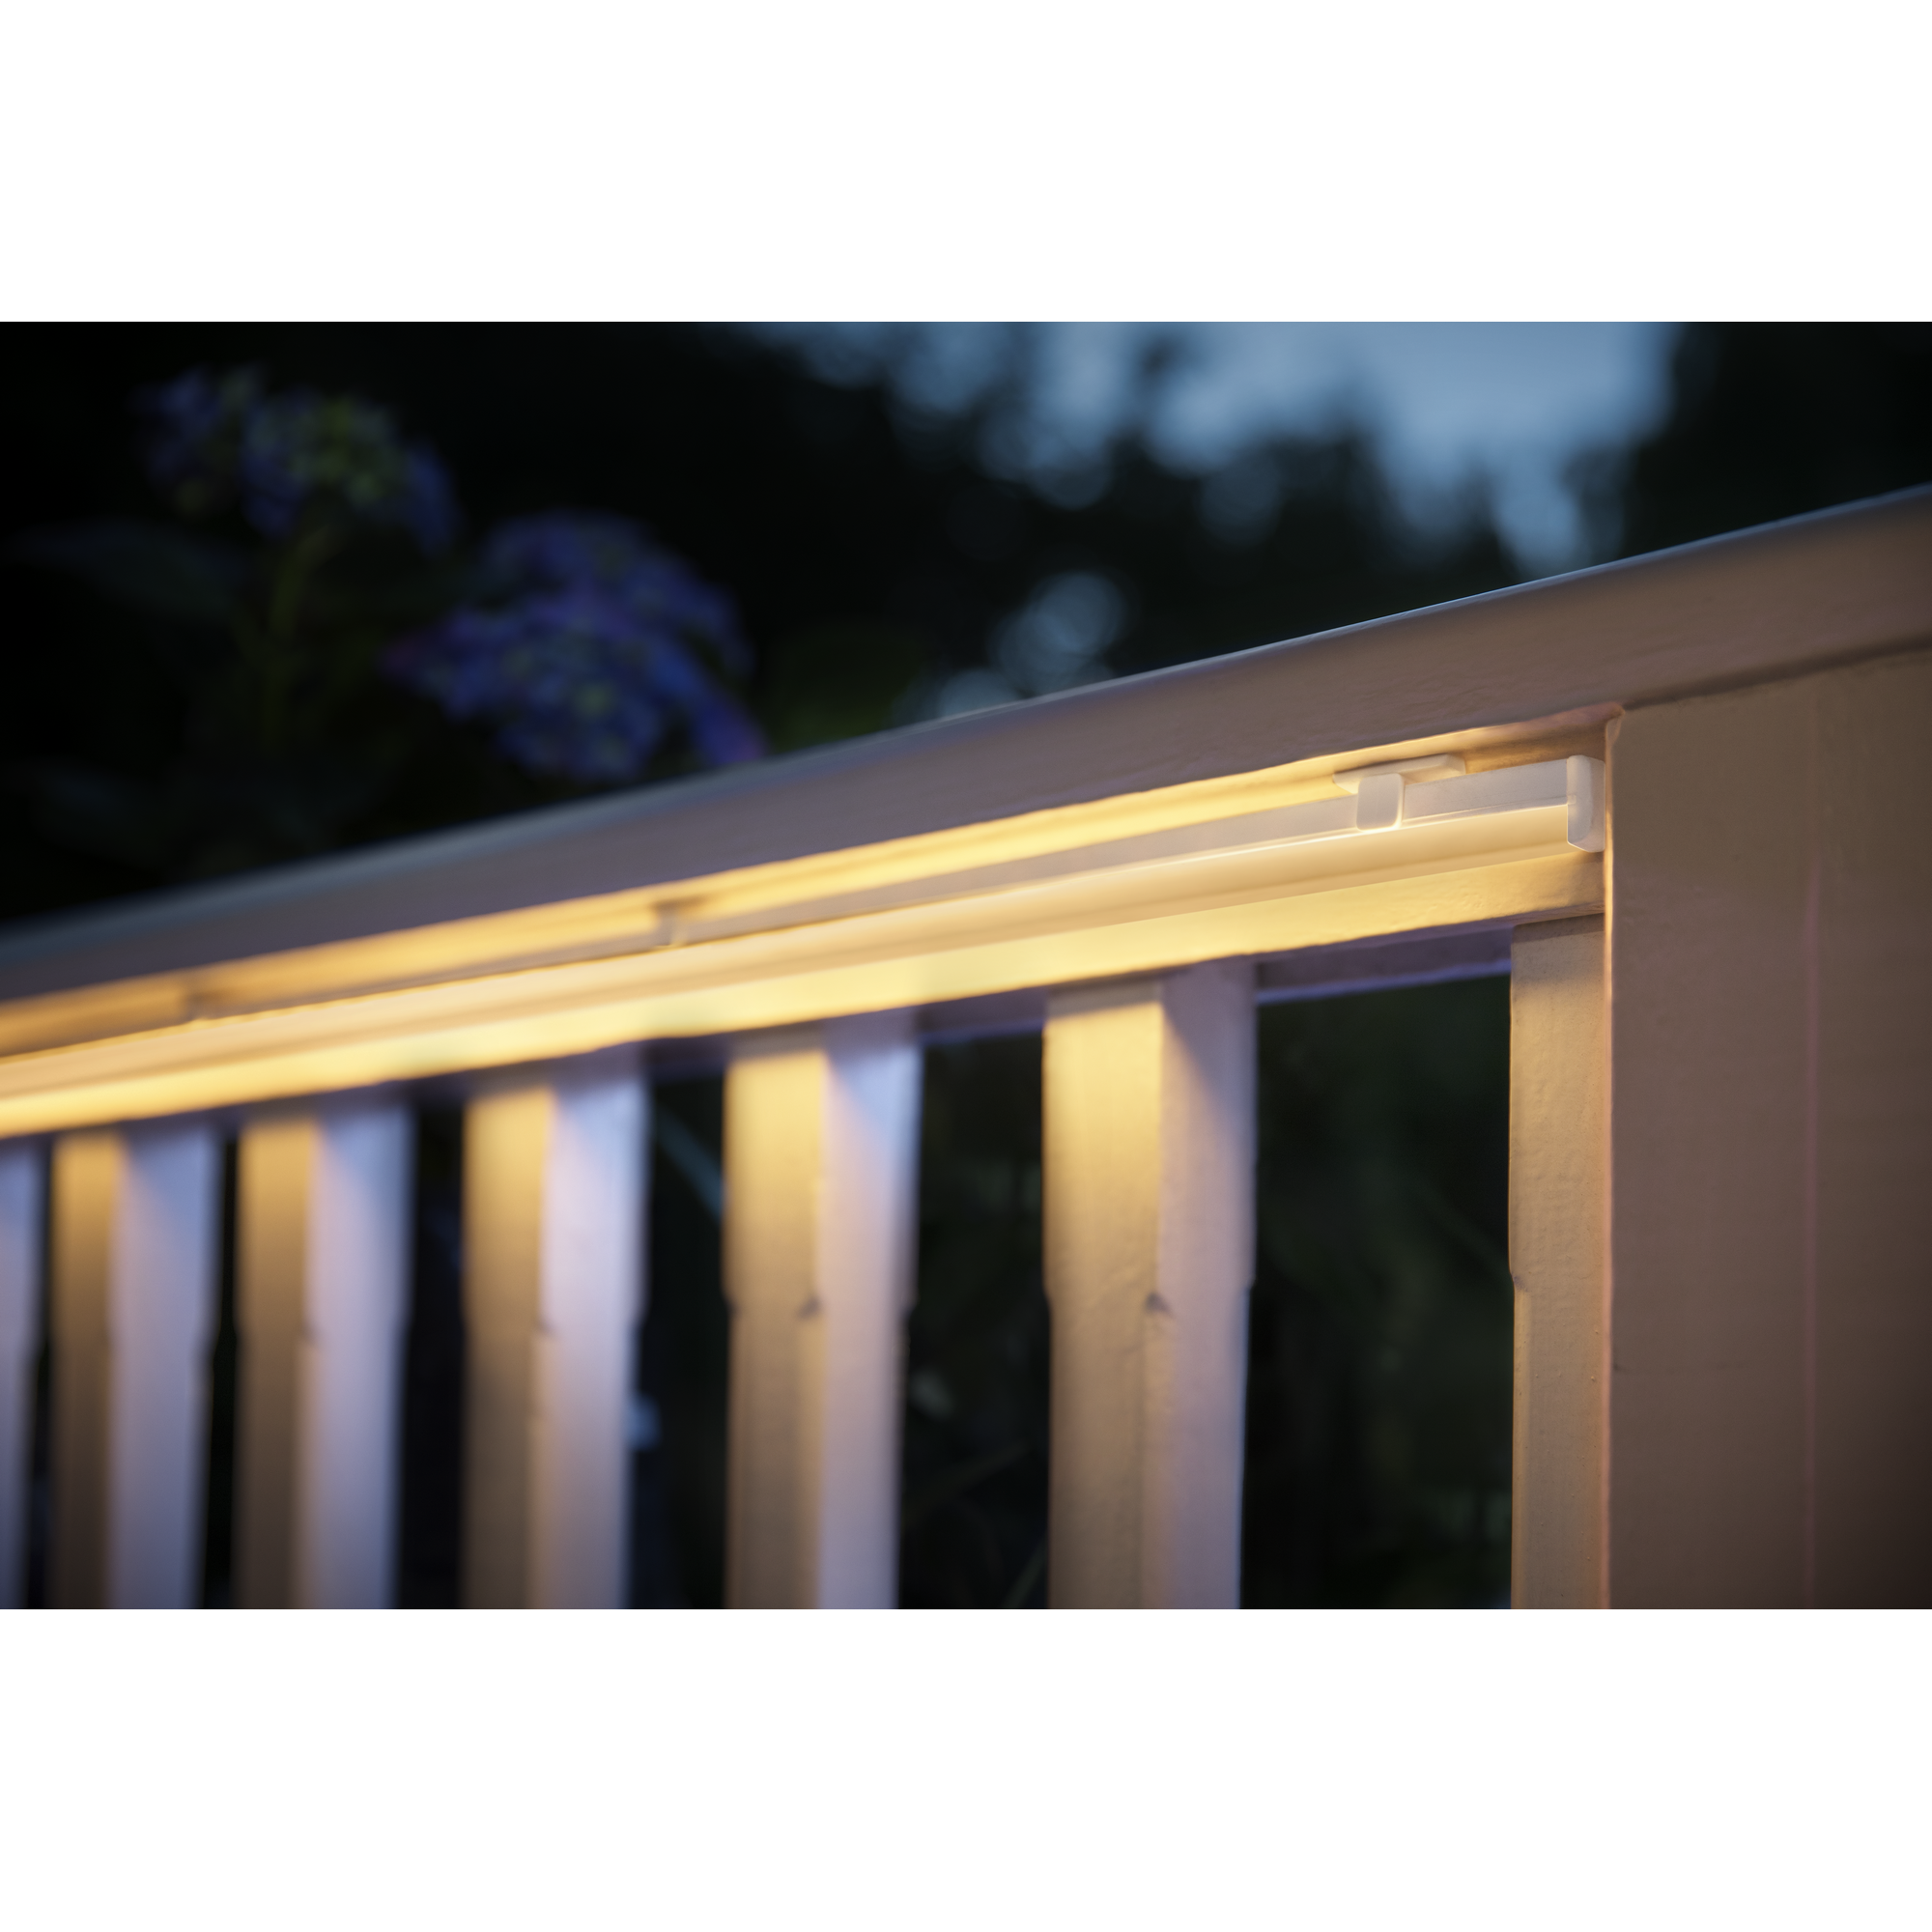 LED-Outdoor Lightstrip "Hue" White & Color Ambiance 2 m 780 lm + product picture